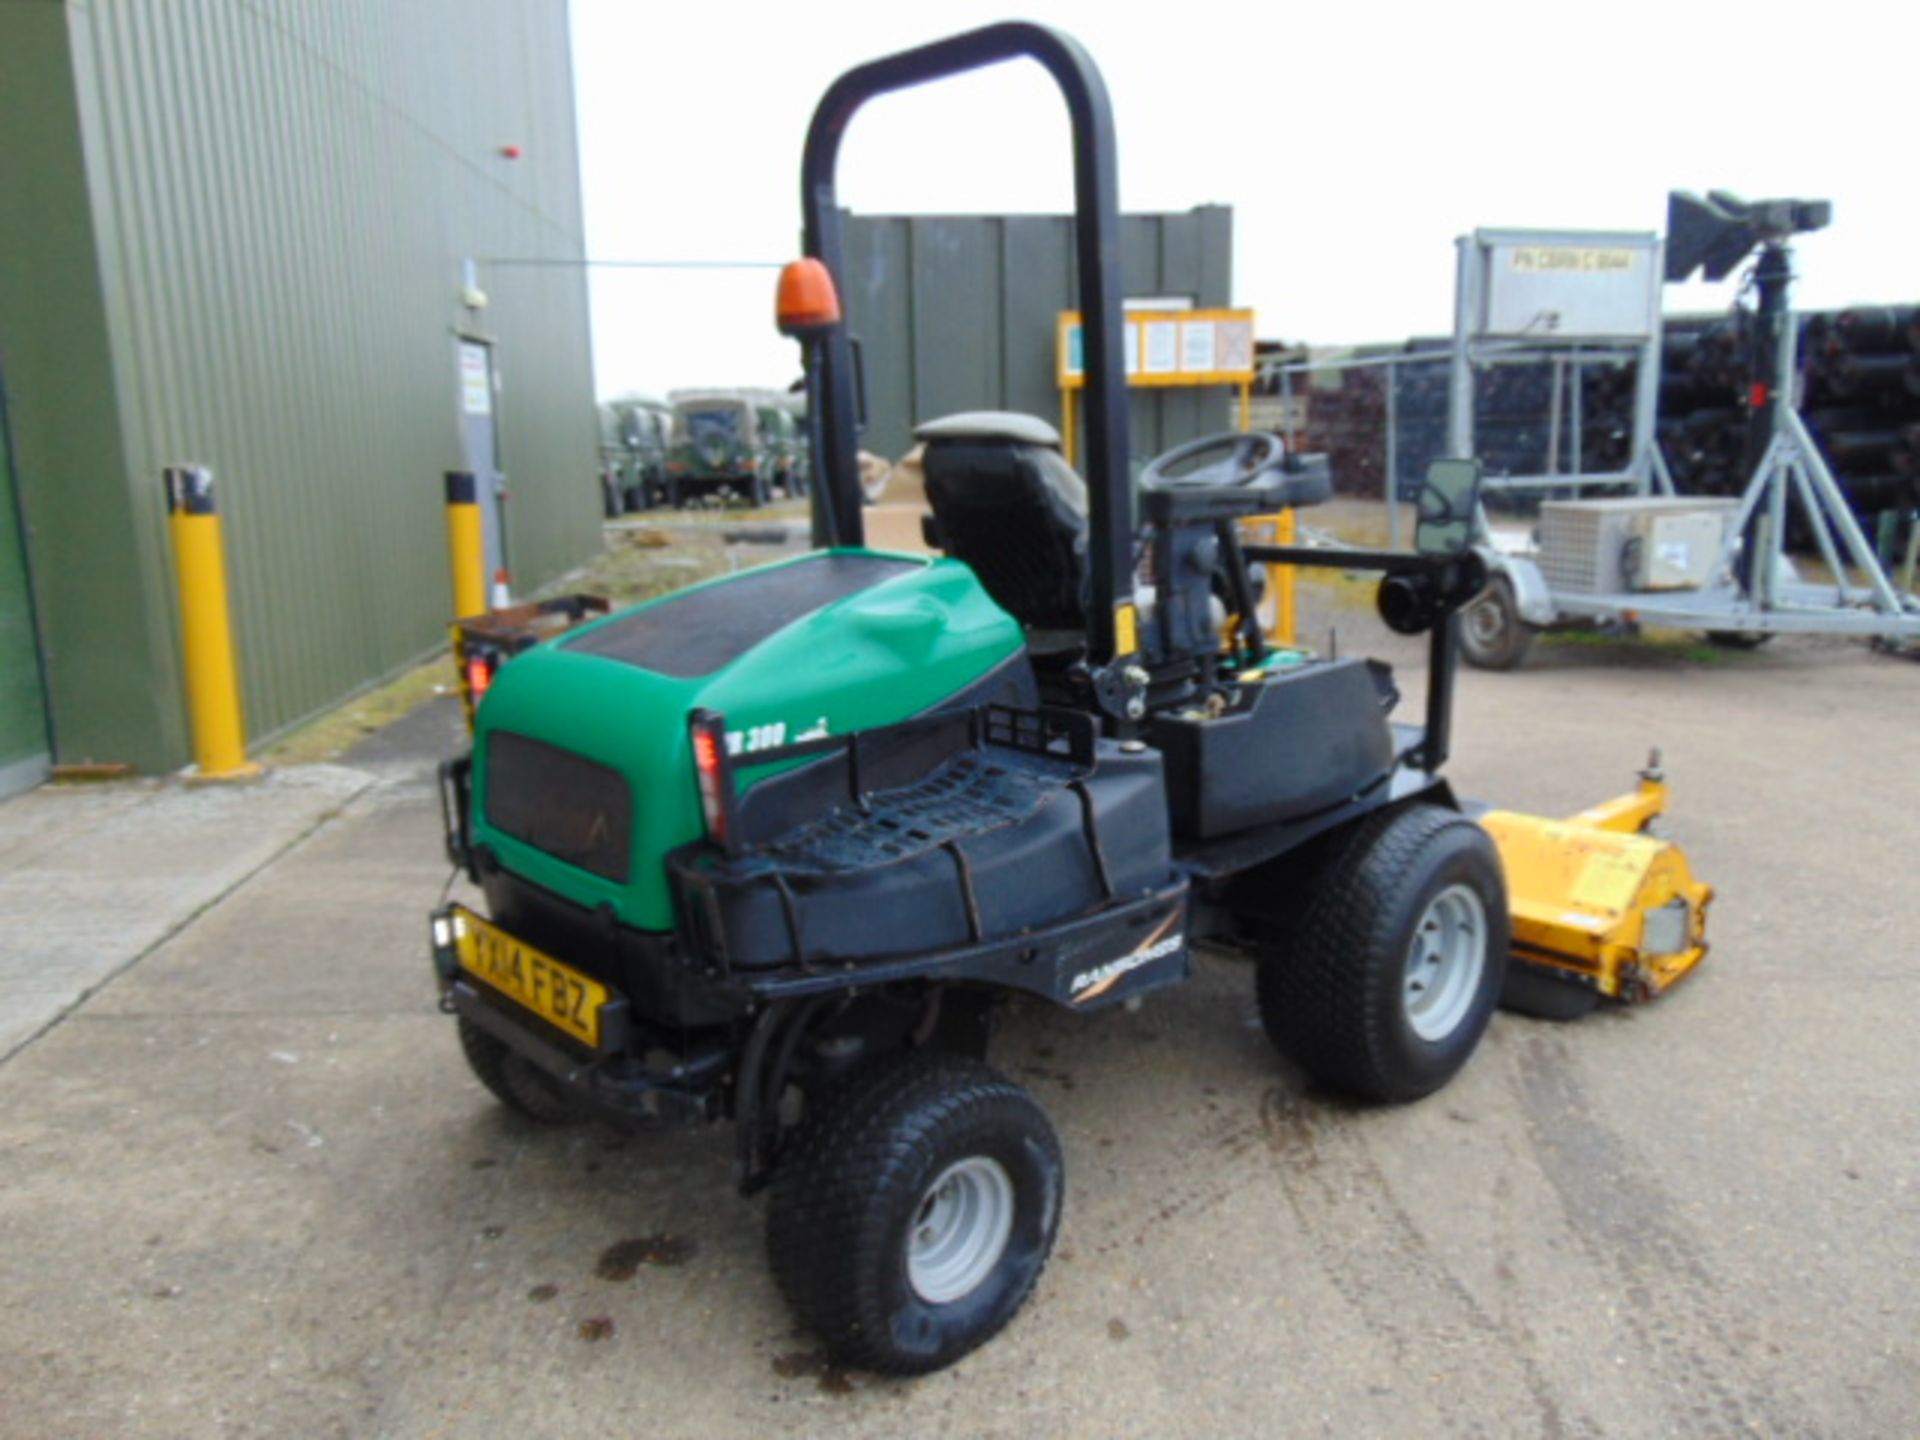 2014 Ransomes HR300 C/W Muthing Outfront Flail Mower ONLY 2,258 HOURS! - Image 6 of 19